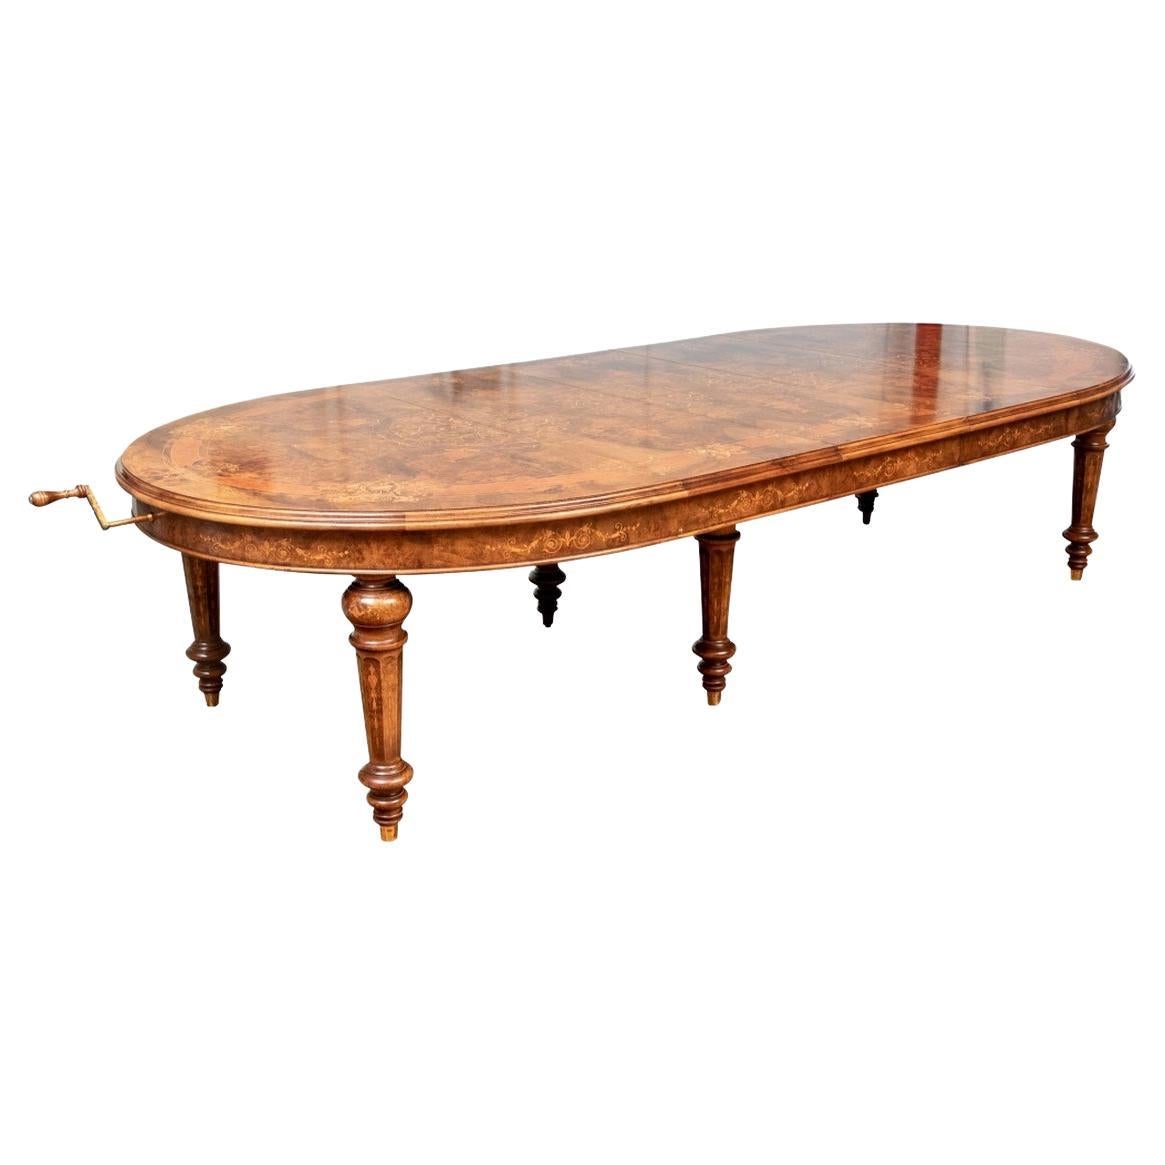 Outstanding Elaborate Antique Inlaid Burled Marquetry Dining Table